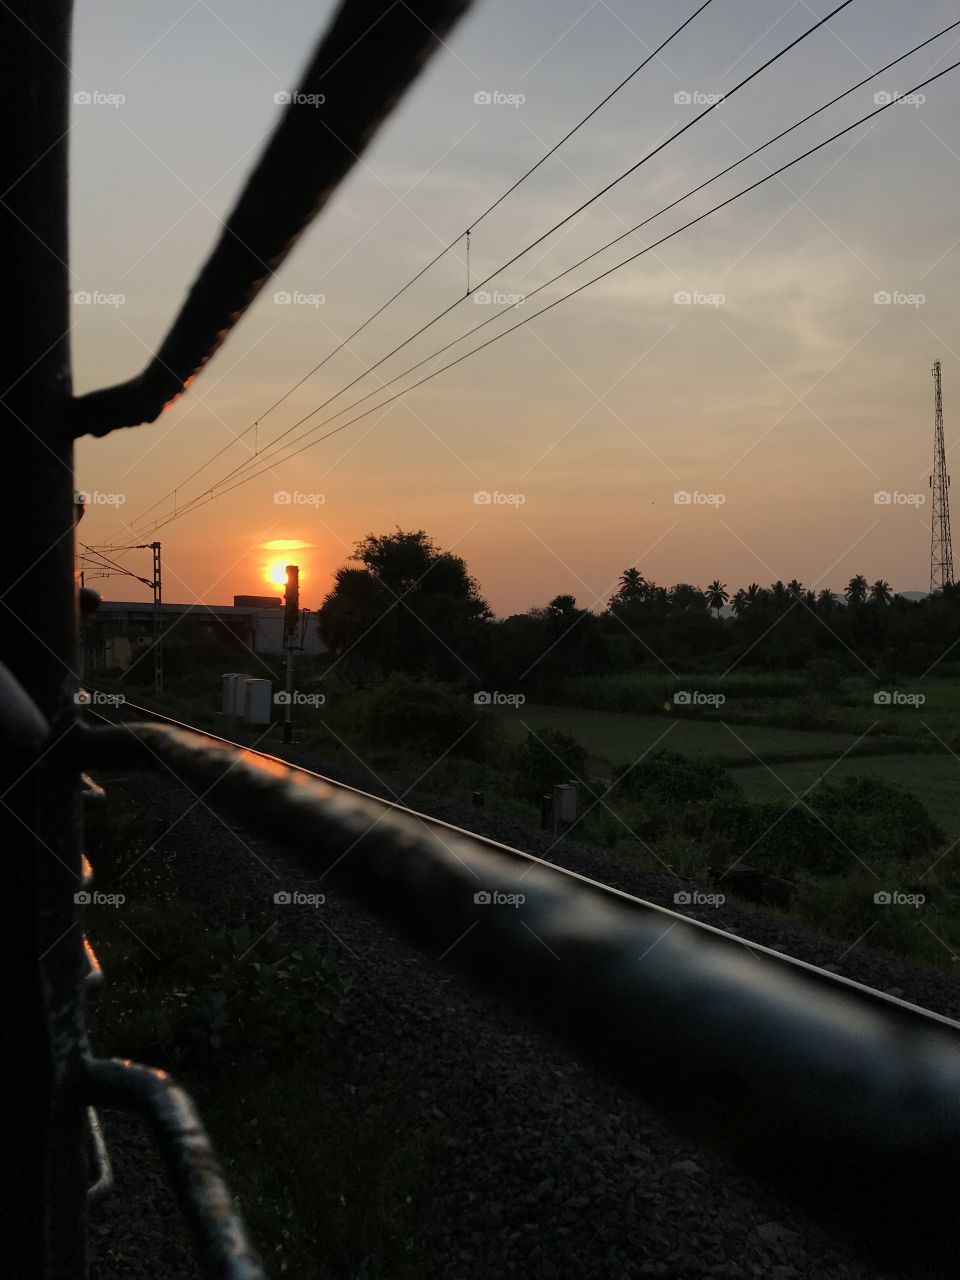 Got hungry for photography while travelling by train. Beautiful sunset, always mesmerised with it. Its perfect.